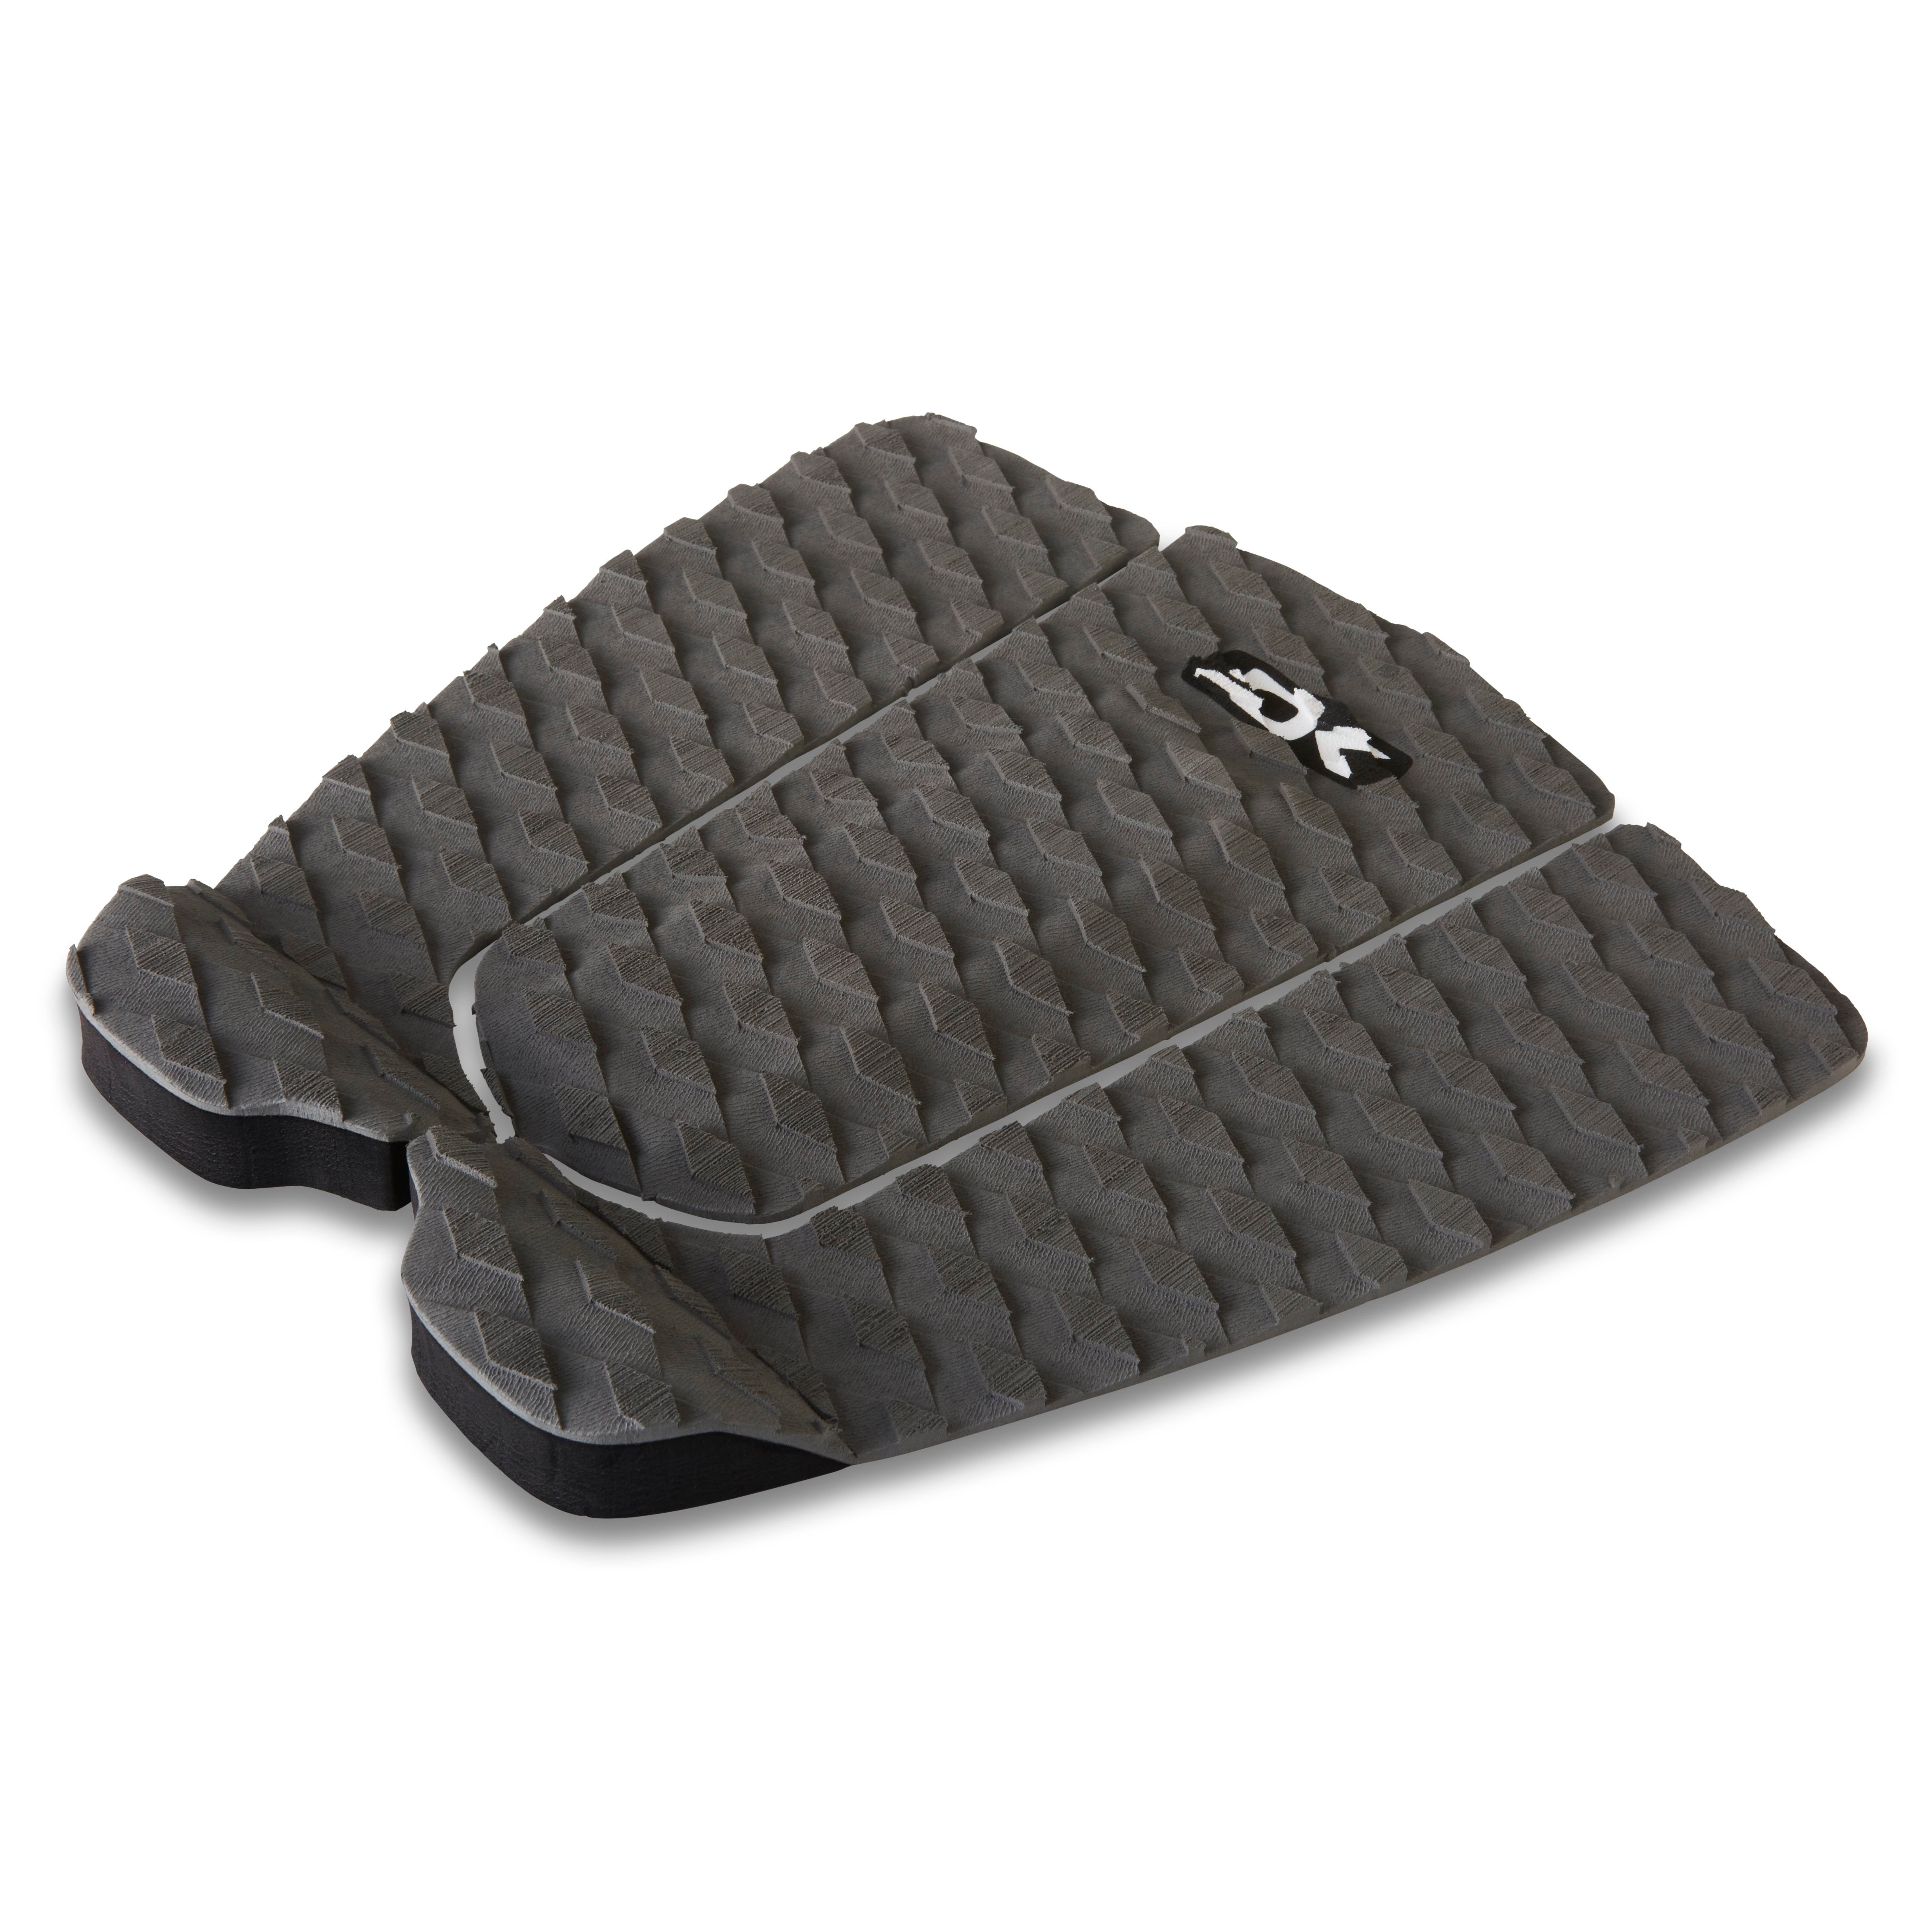 Dakine Andy Irons Pro Traction Pad 021-Shadow